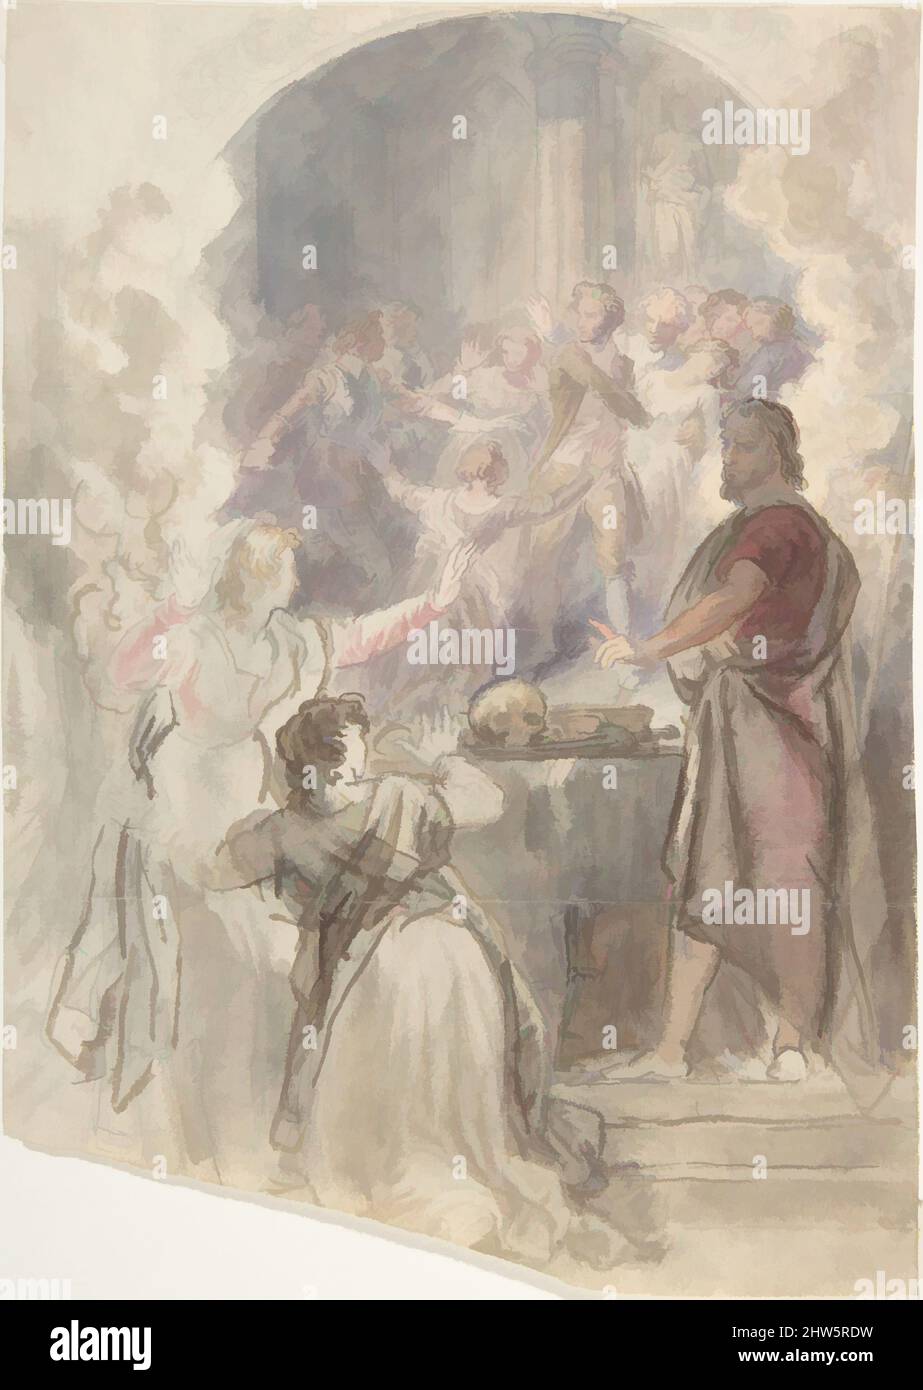 Art inspired by Scene from 'My Aunt Margaret's Mirror' (Keepsake Story by Sir Walter Scott), ca. 1828, Watercolor, Sheet: 7 5/8 x 5 7/16 in. (19.4 x 13.8 cm), Drawings, John William Wright (British, London 1802–1848 London, Classic works modernized by Artotop with a splash of modernity. Shapes, color and value, eye-catching visual impact on art. Emotions through freedom of artworks in a contemporary way. A timeless message pursuing a wildly creative new direction. Artists turning to the digital medium and creating the Artotop NFT Stock Photo